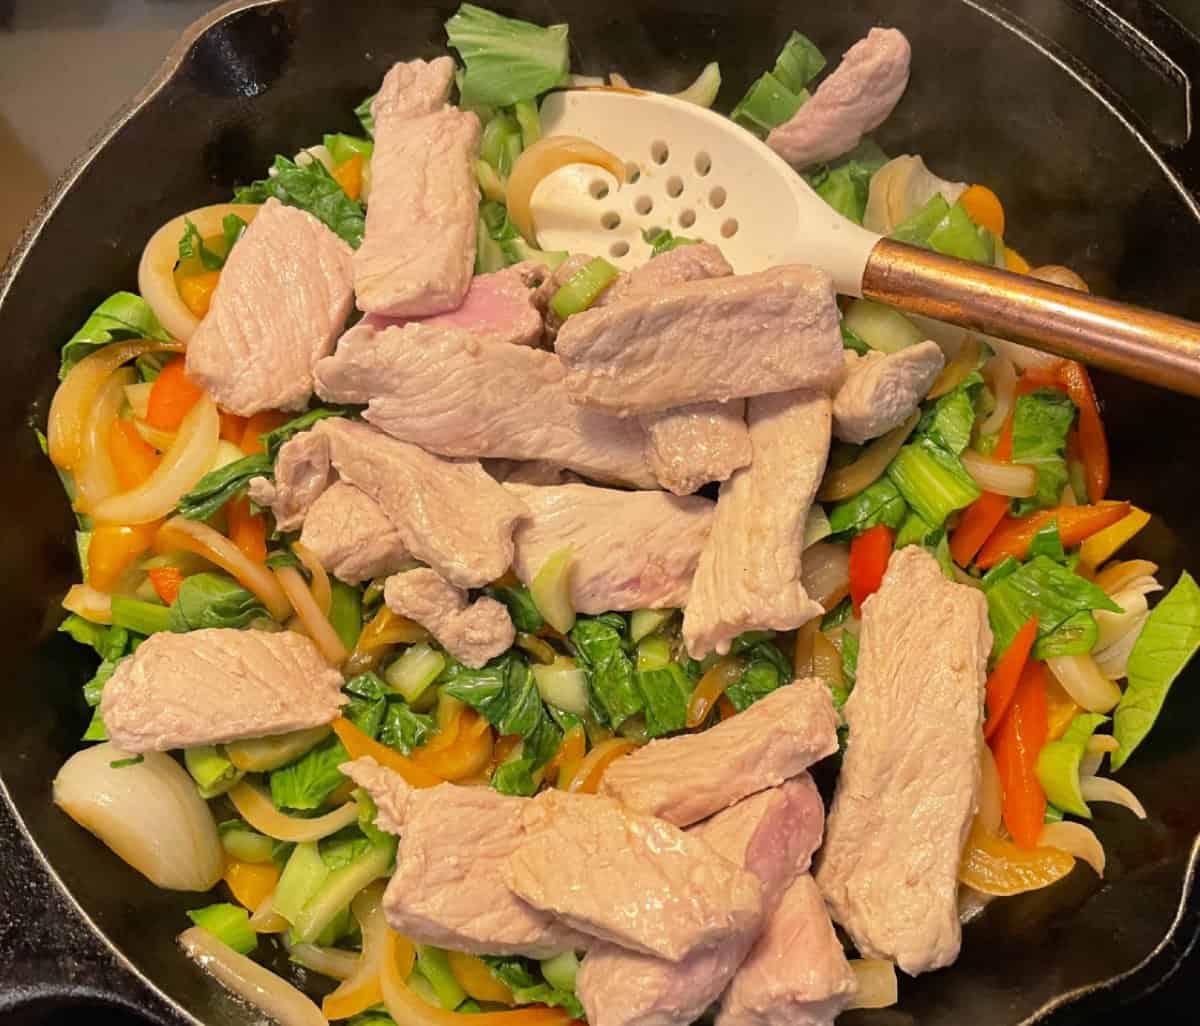 Sliced pork, white onions, red peppers, orange peppers, and bok choy sautéing in a black frying pan.